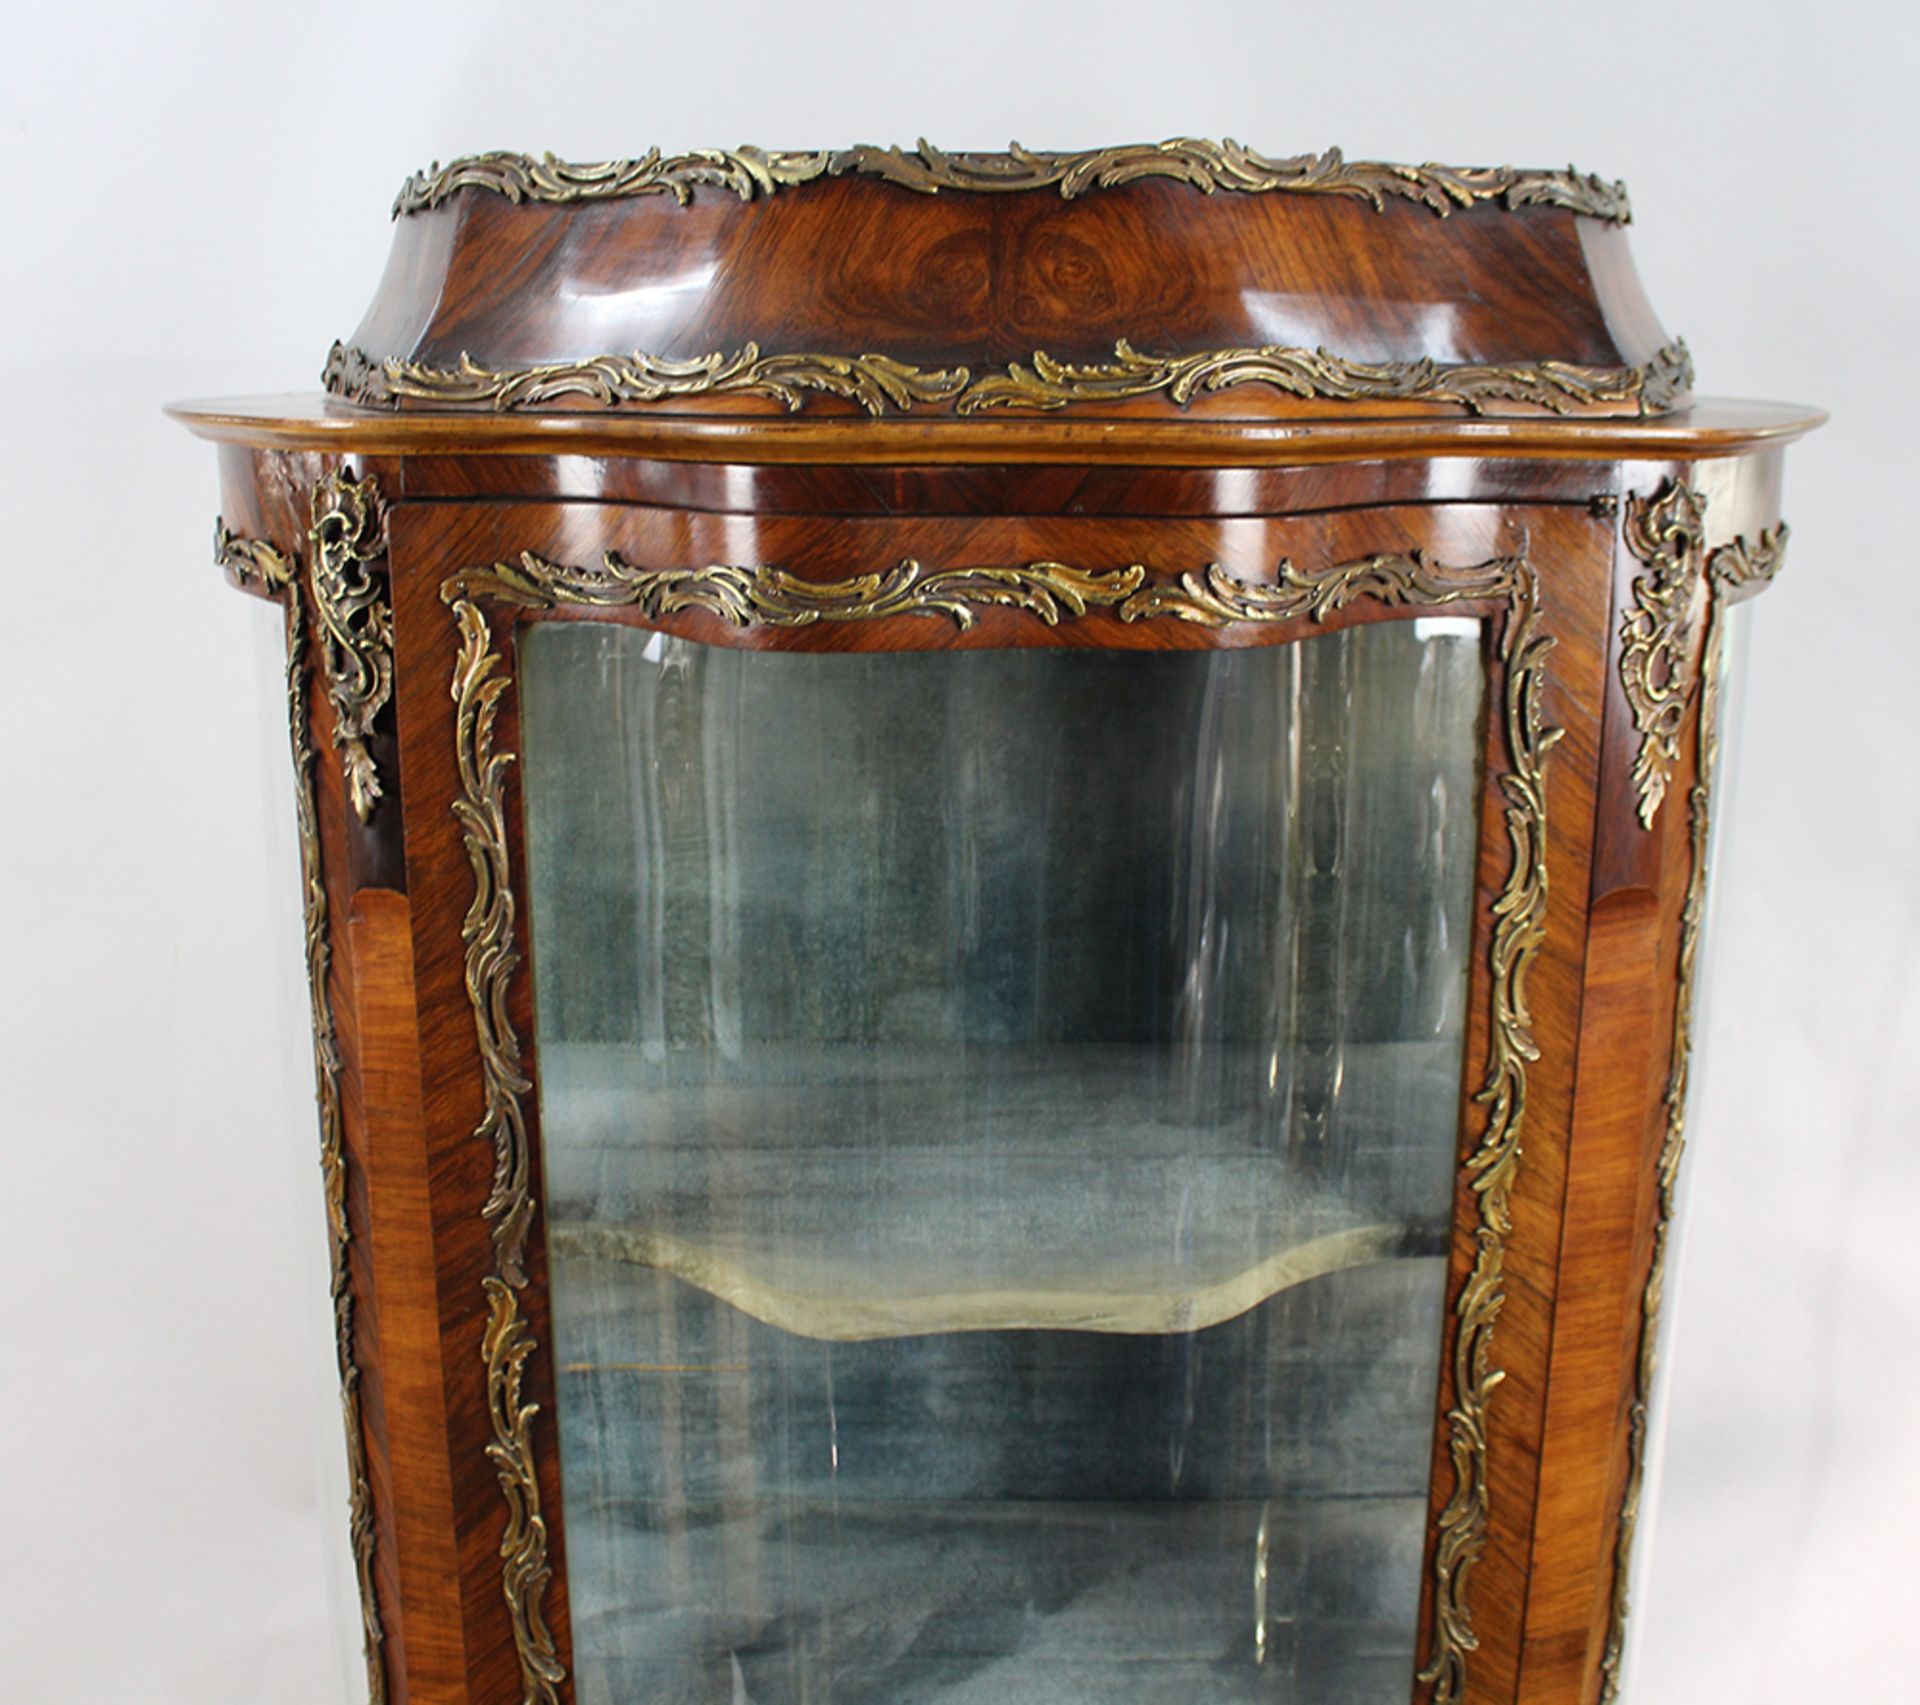 Antique French Serpentine Vernis Martin Display Cabinet - Image 11 of 12